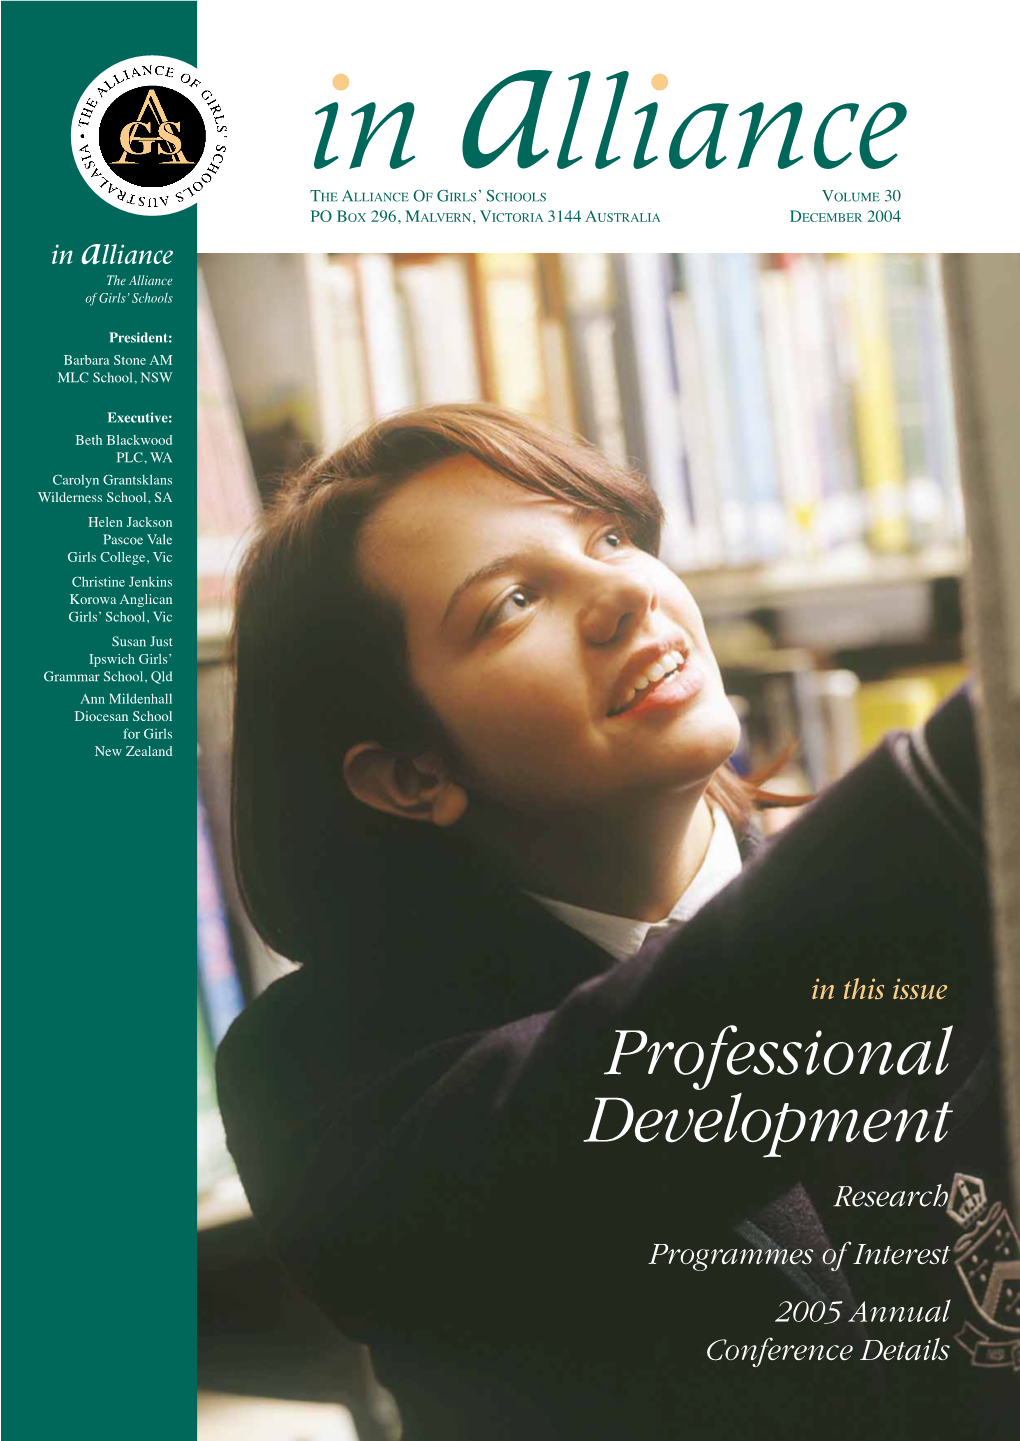 Professional Development Research Programmes of Interest 2005 Annual Conference Details in Alliance Editorial Deadlines for 2005 from the EDITOR